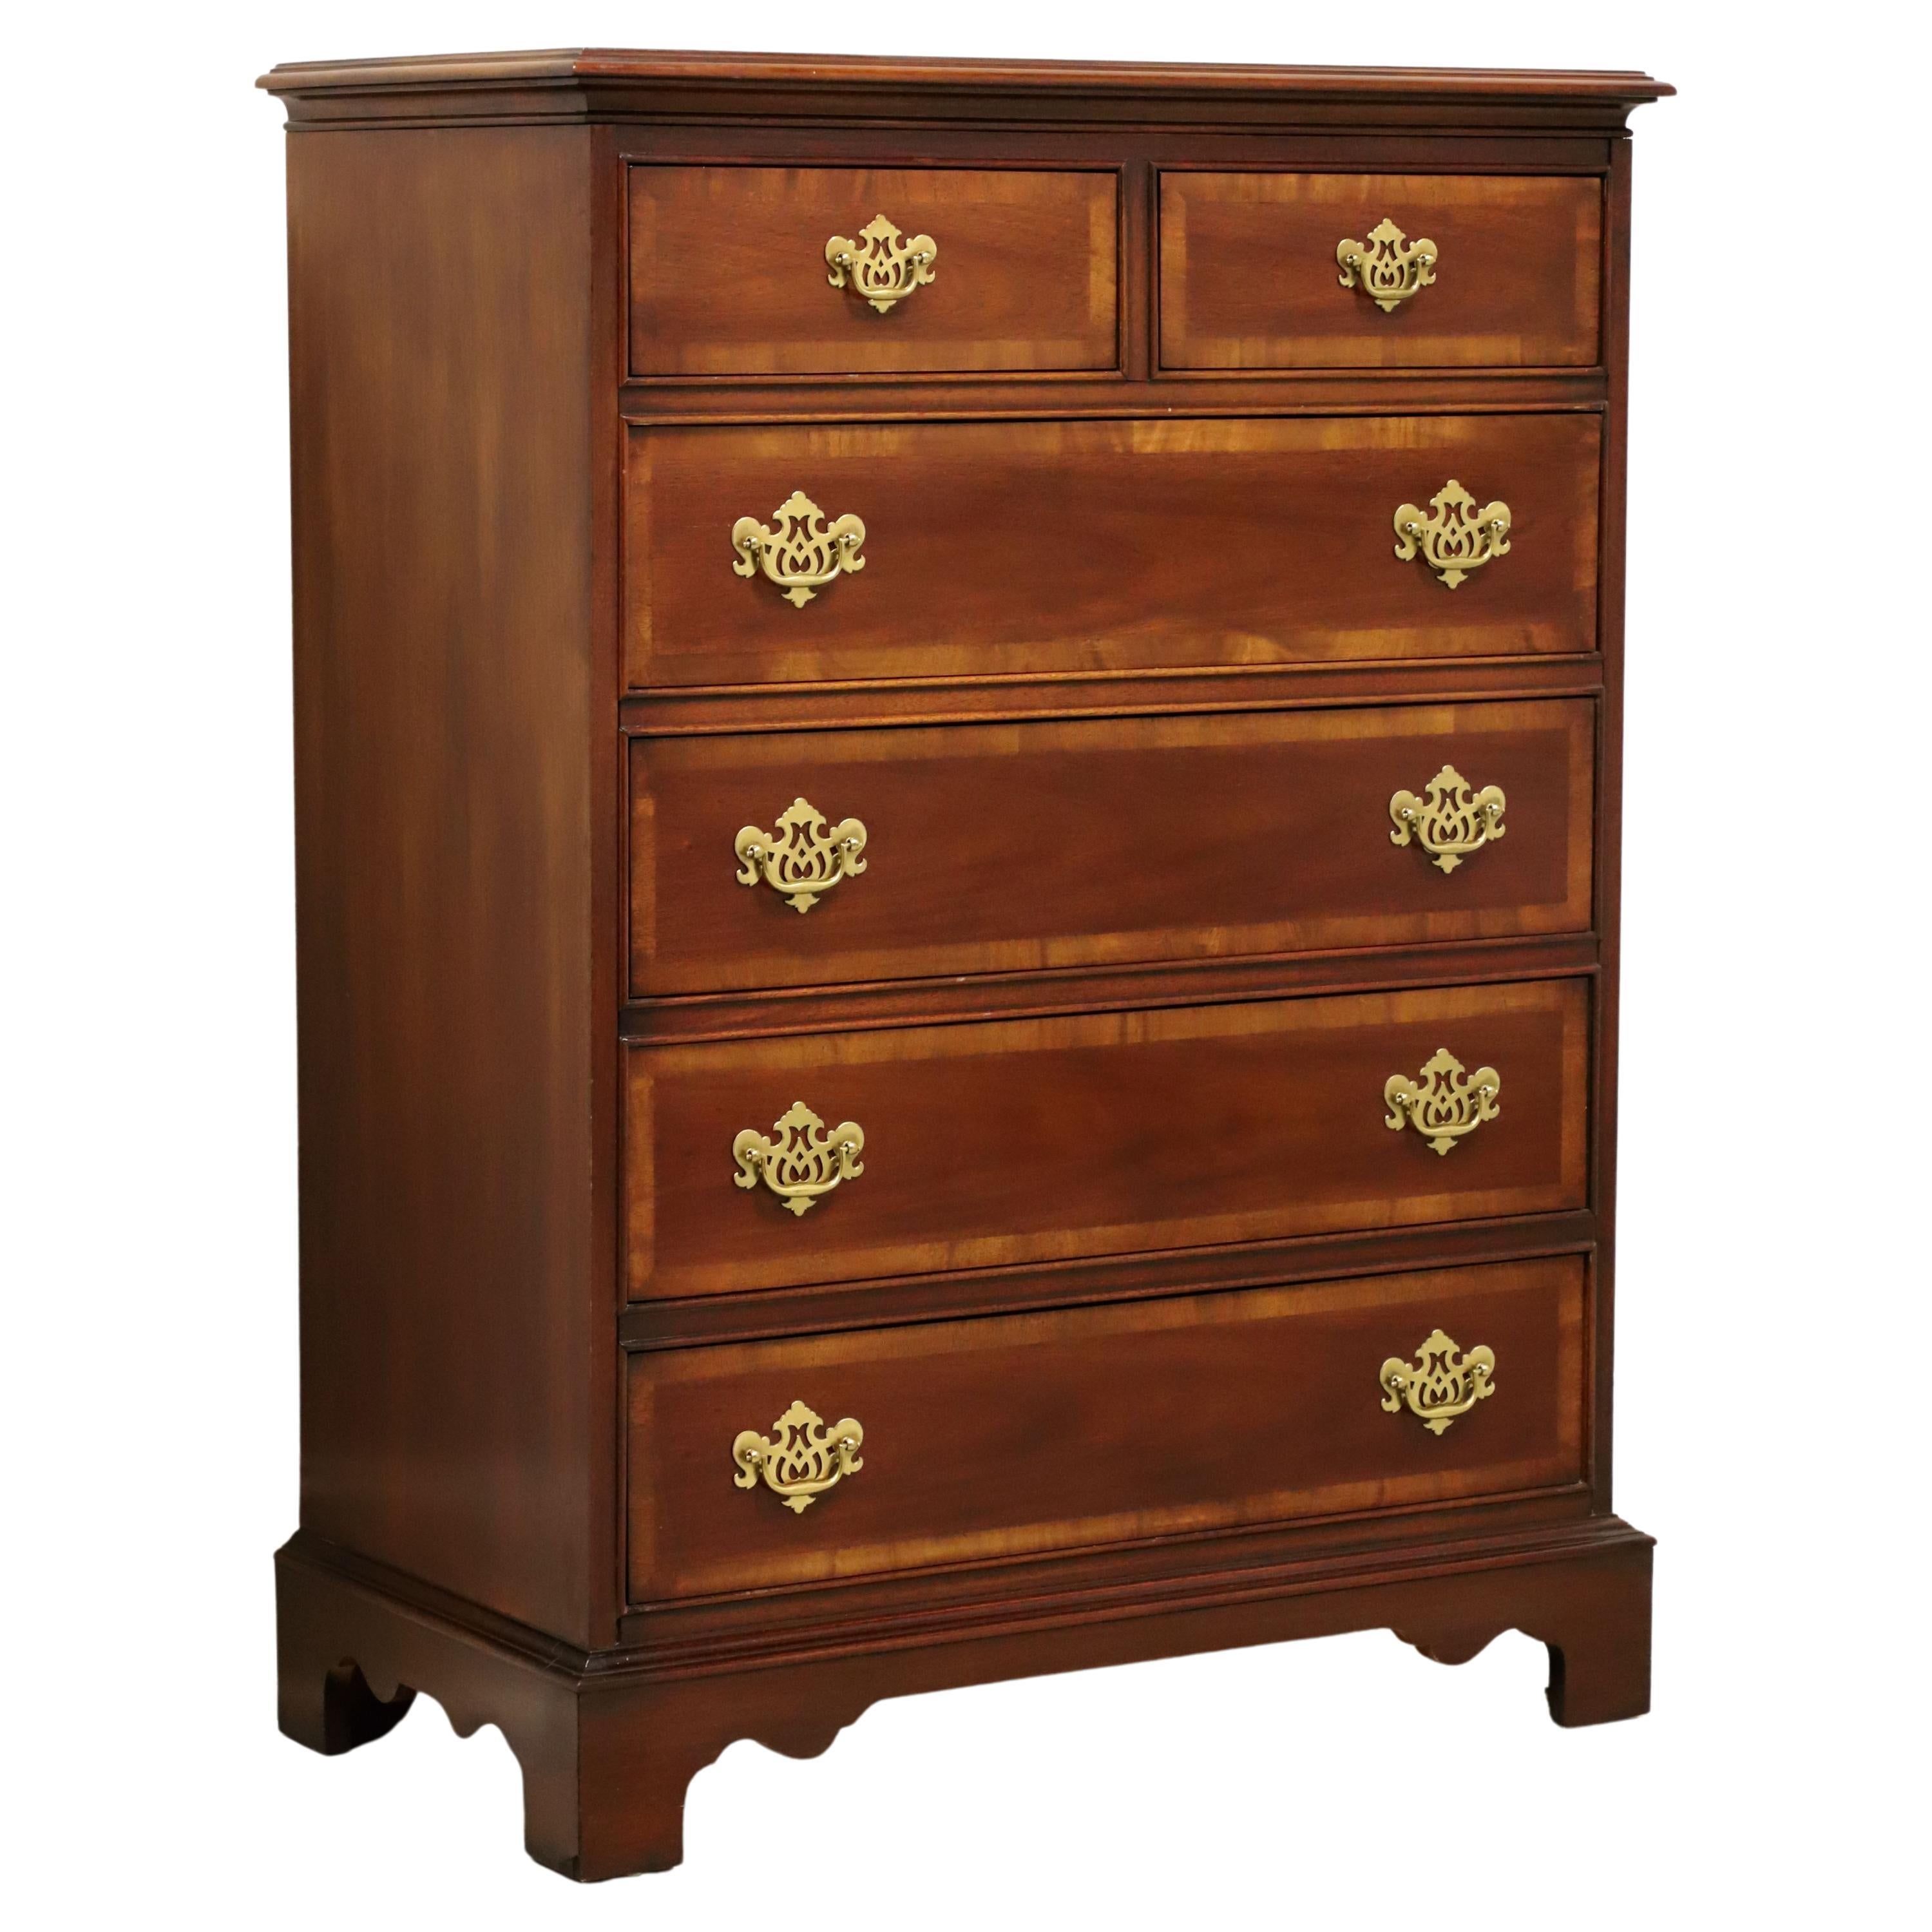 DIXIE Banded Mahogany Chippendale Chest of Six Drawers - A For Sale